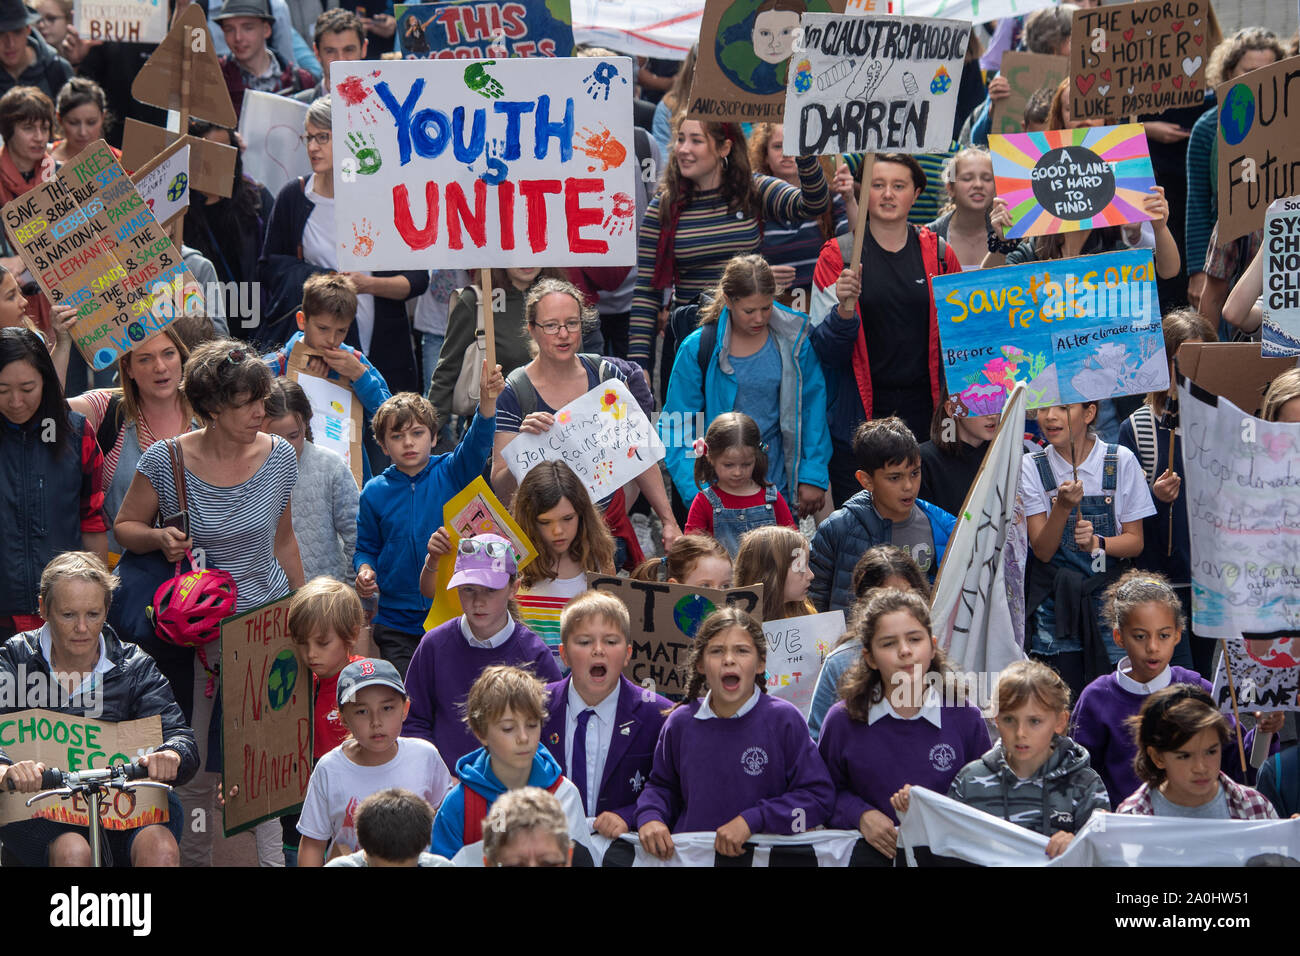 People march through the streets as part of the UK Student Climate Network's Global Climate Strike in Cambridge. Stock Photo